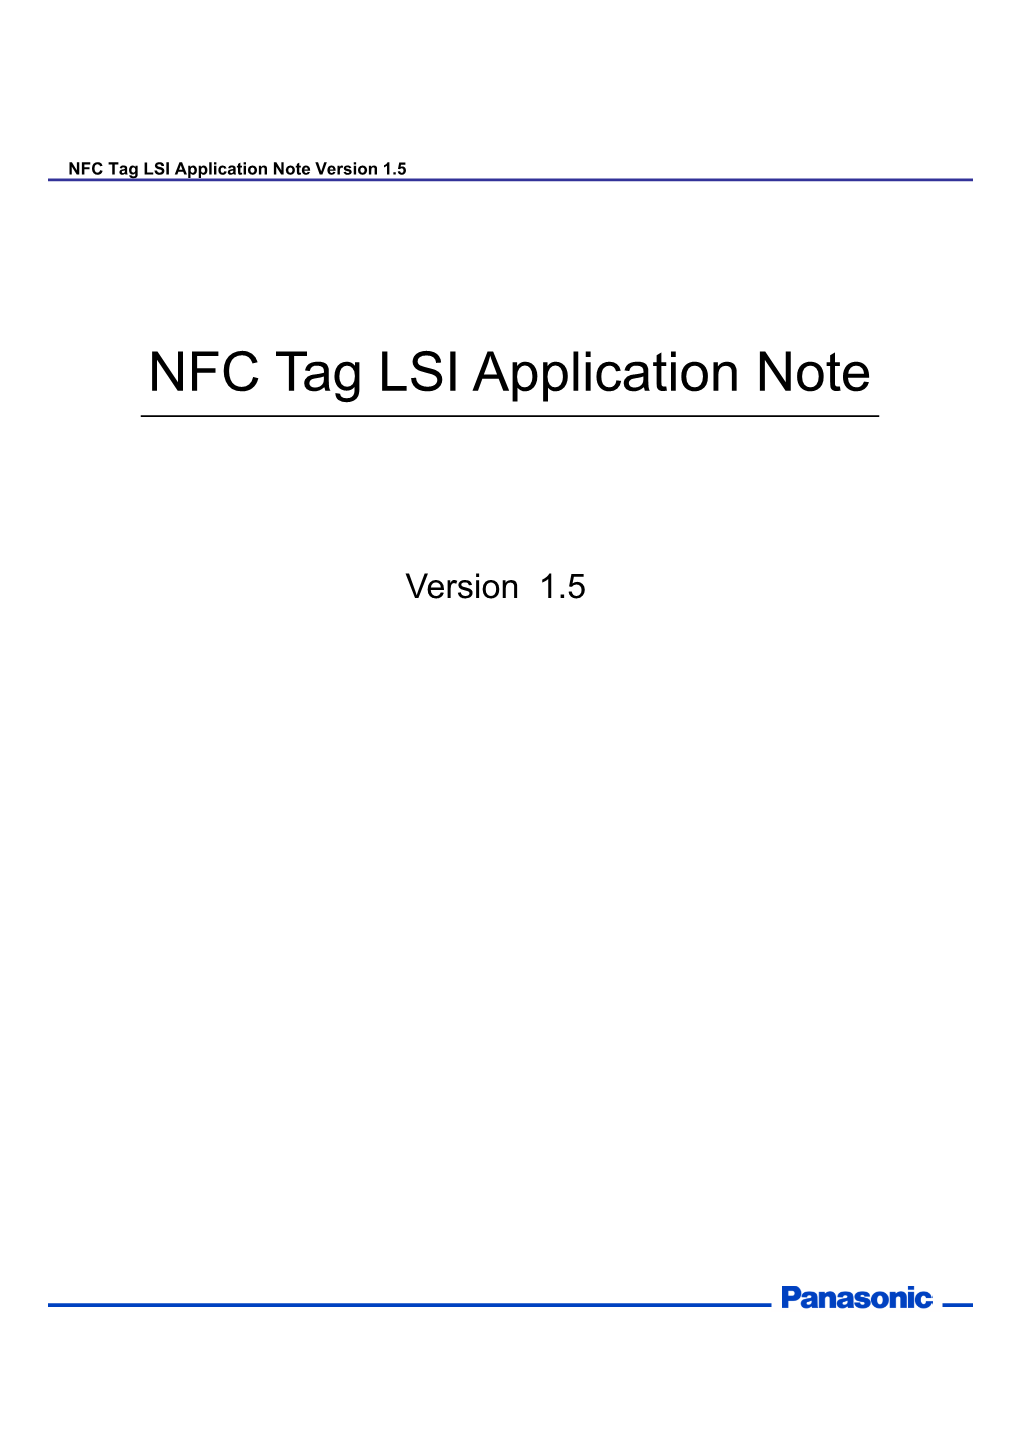 NFC Tag LSI Application Note Version 1.5